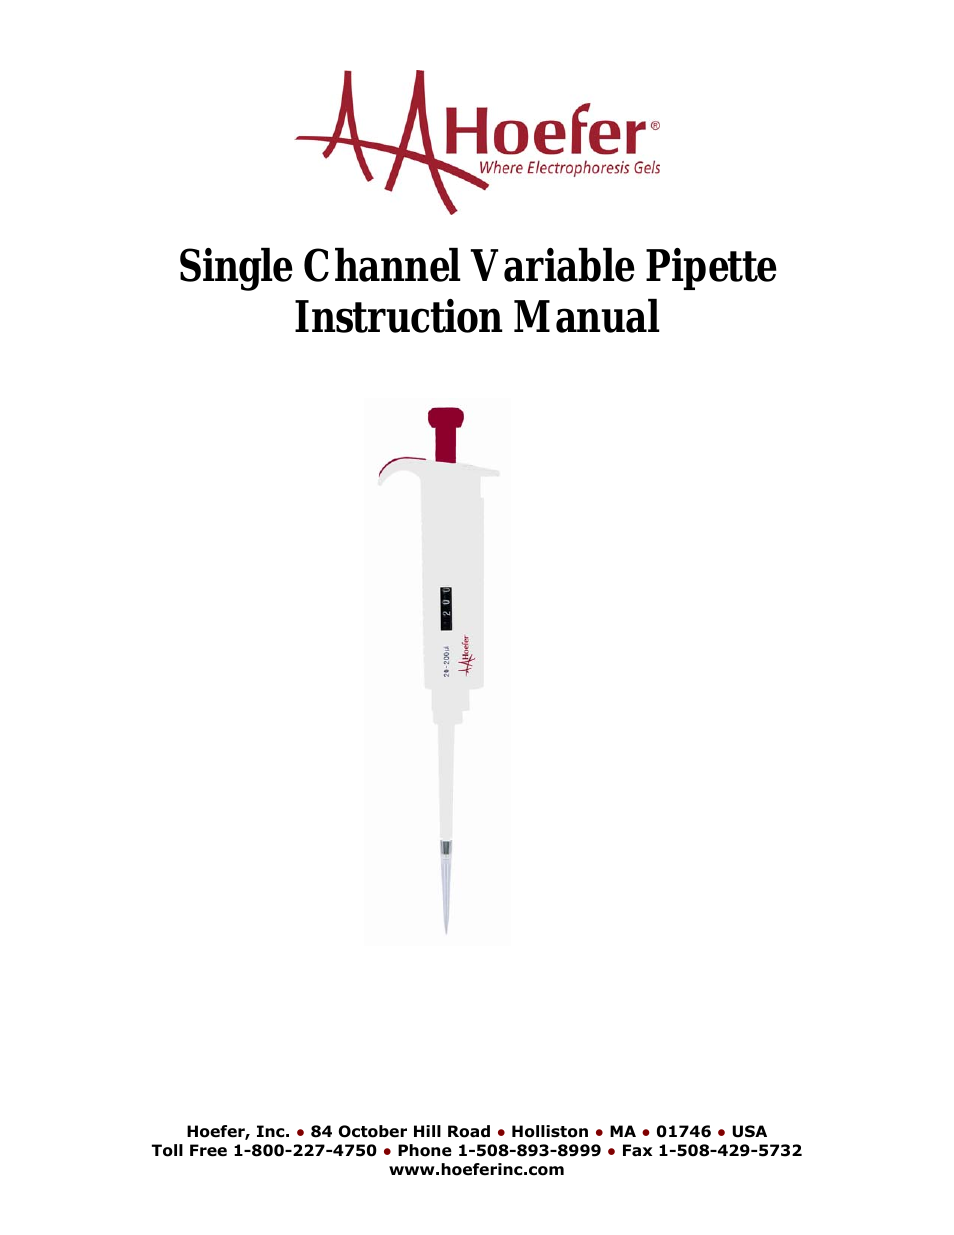 Single Channel Variable Pipette